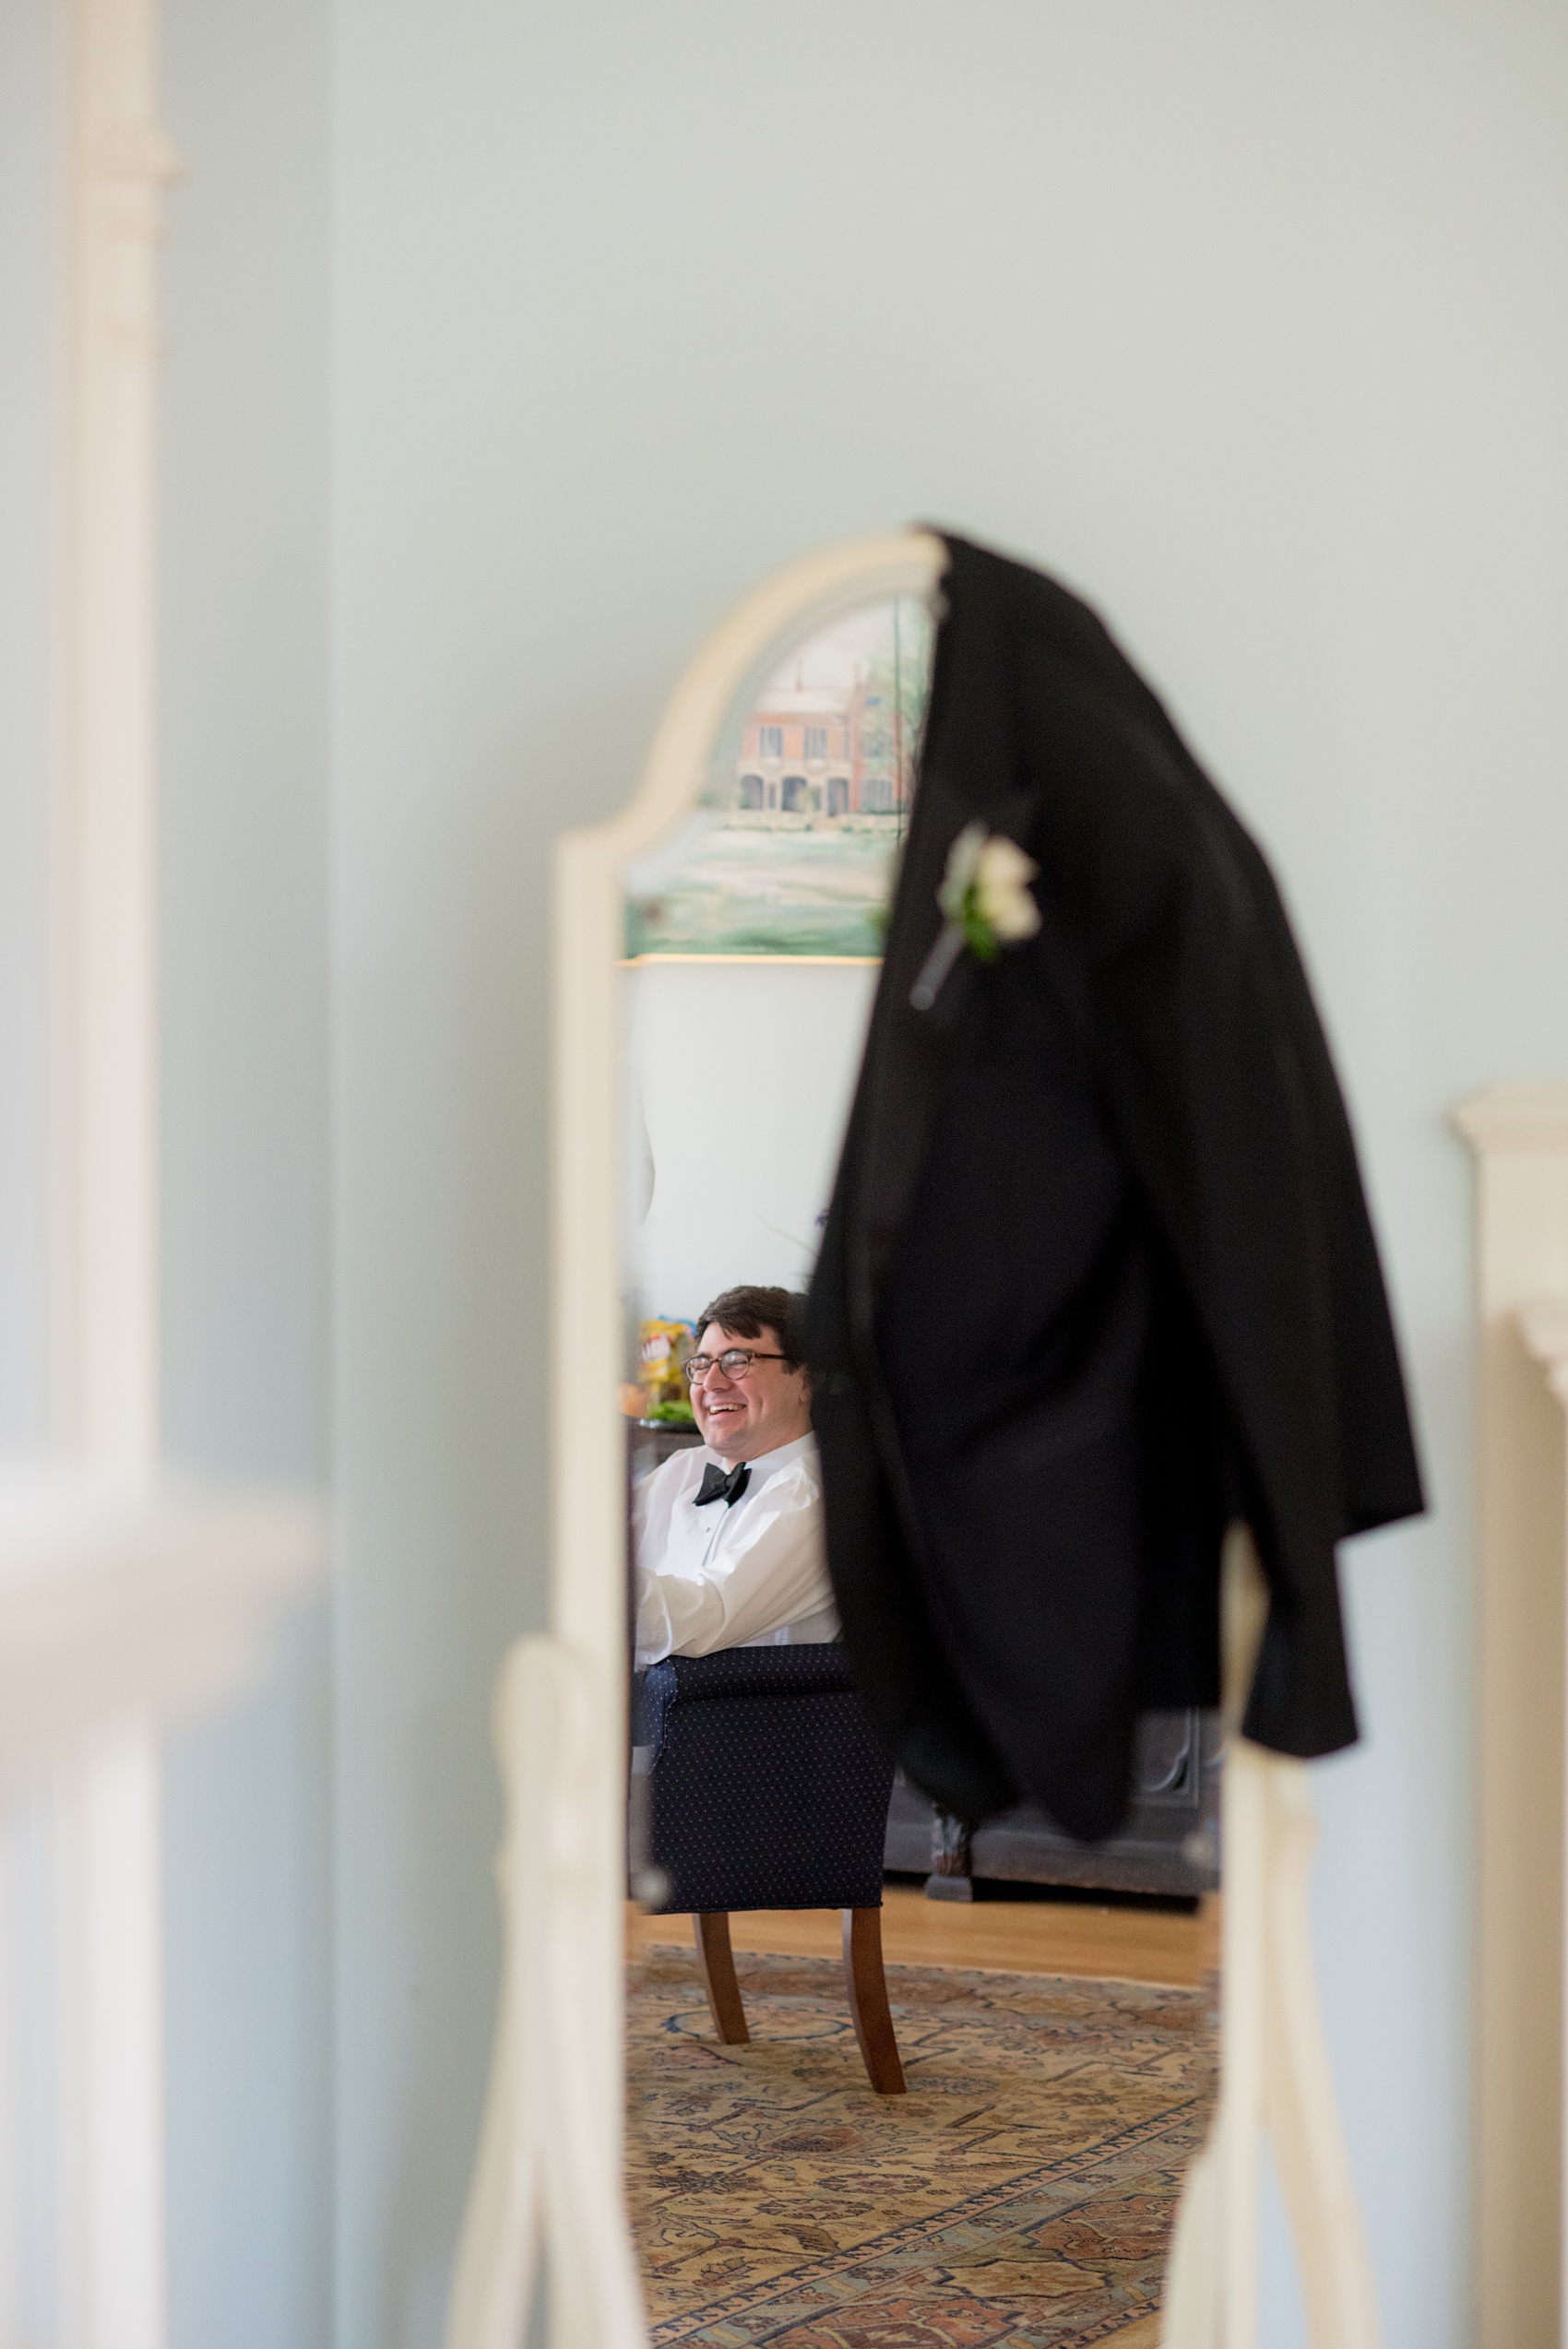 Waveny House wedding photos in Connecticut by Mikkel Paige Photography. Picture of the groom getting ready as seen in the mirror reflection.